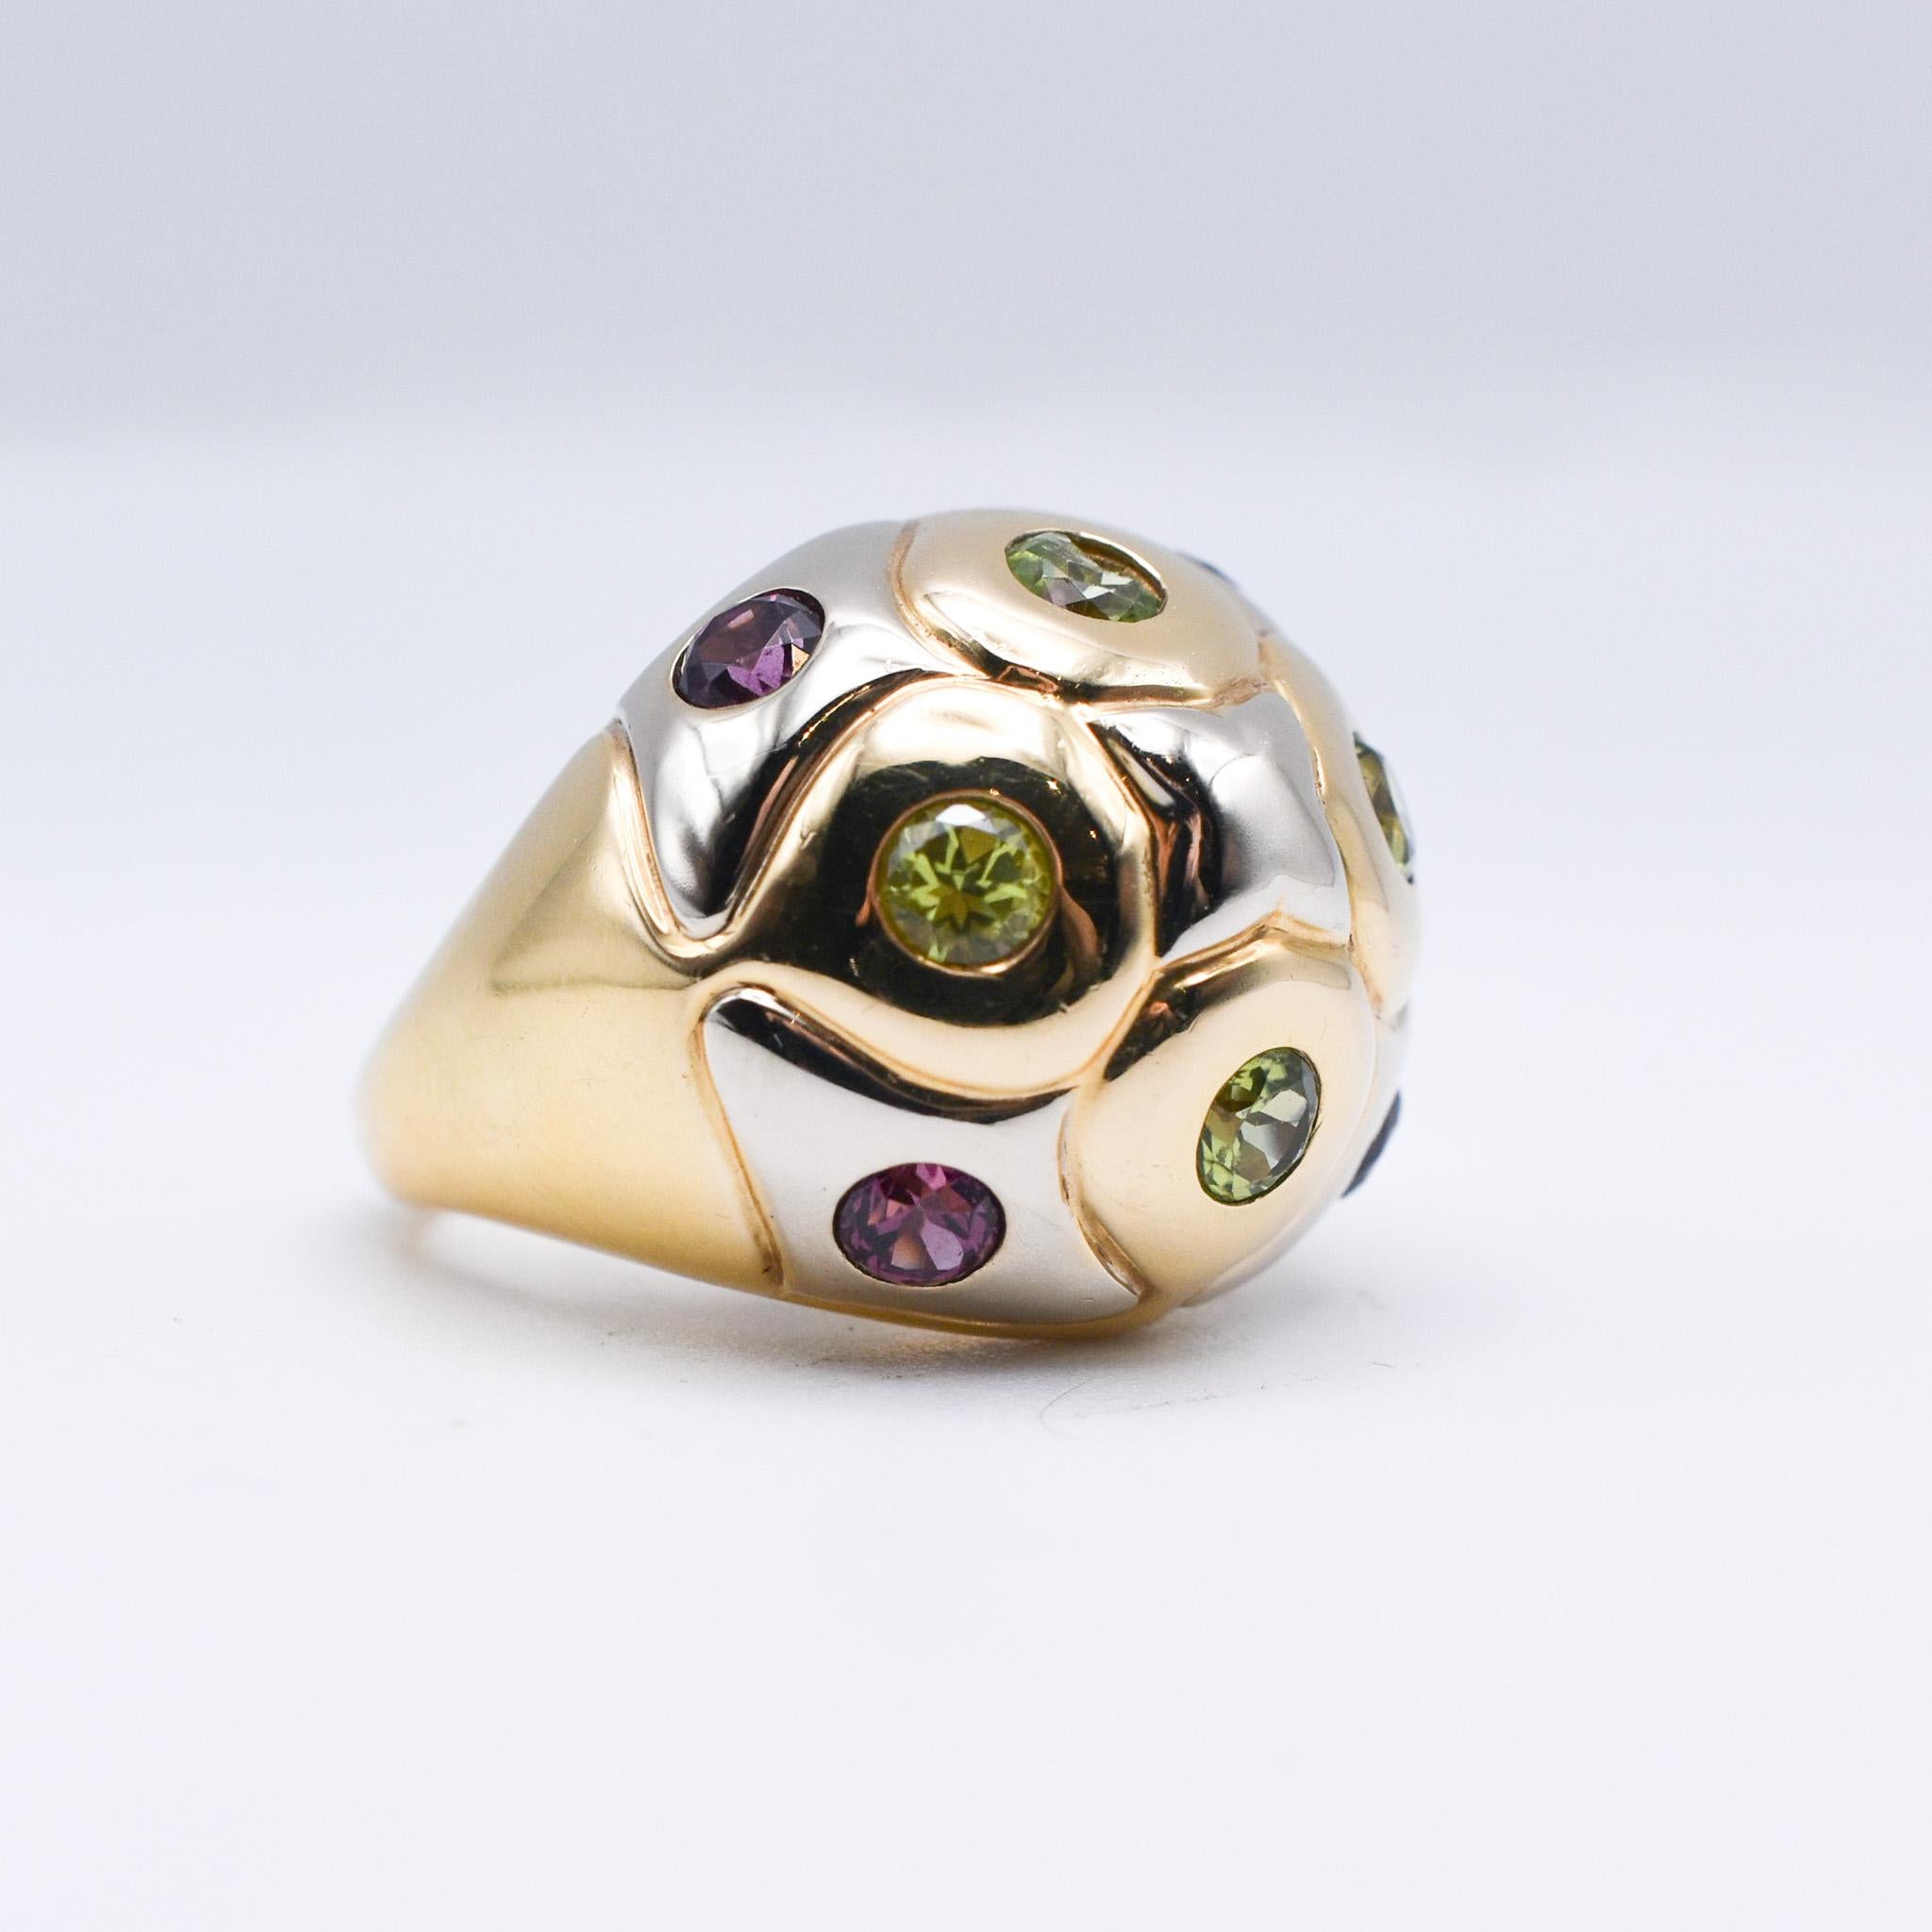 Bulgari Bombé Ring crafted in 18k White and Yellow Gold with Peridot and Amethyst Accents. 
Made in Italy, circa 1980.

Ring size: US 6 3/4.